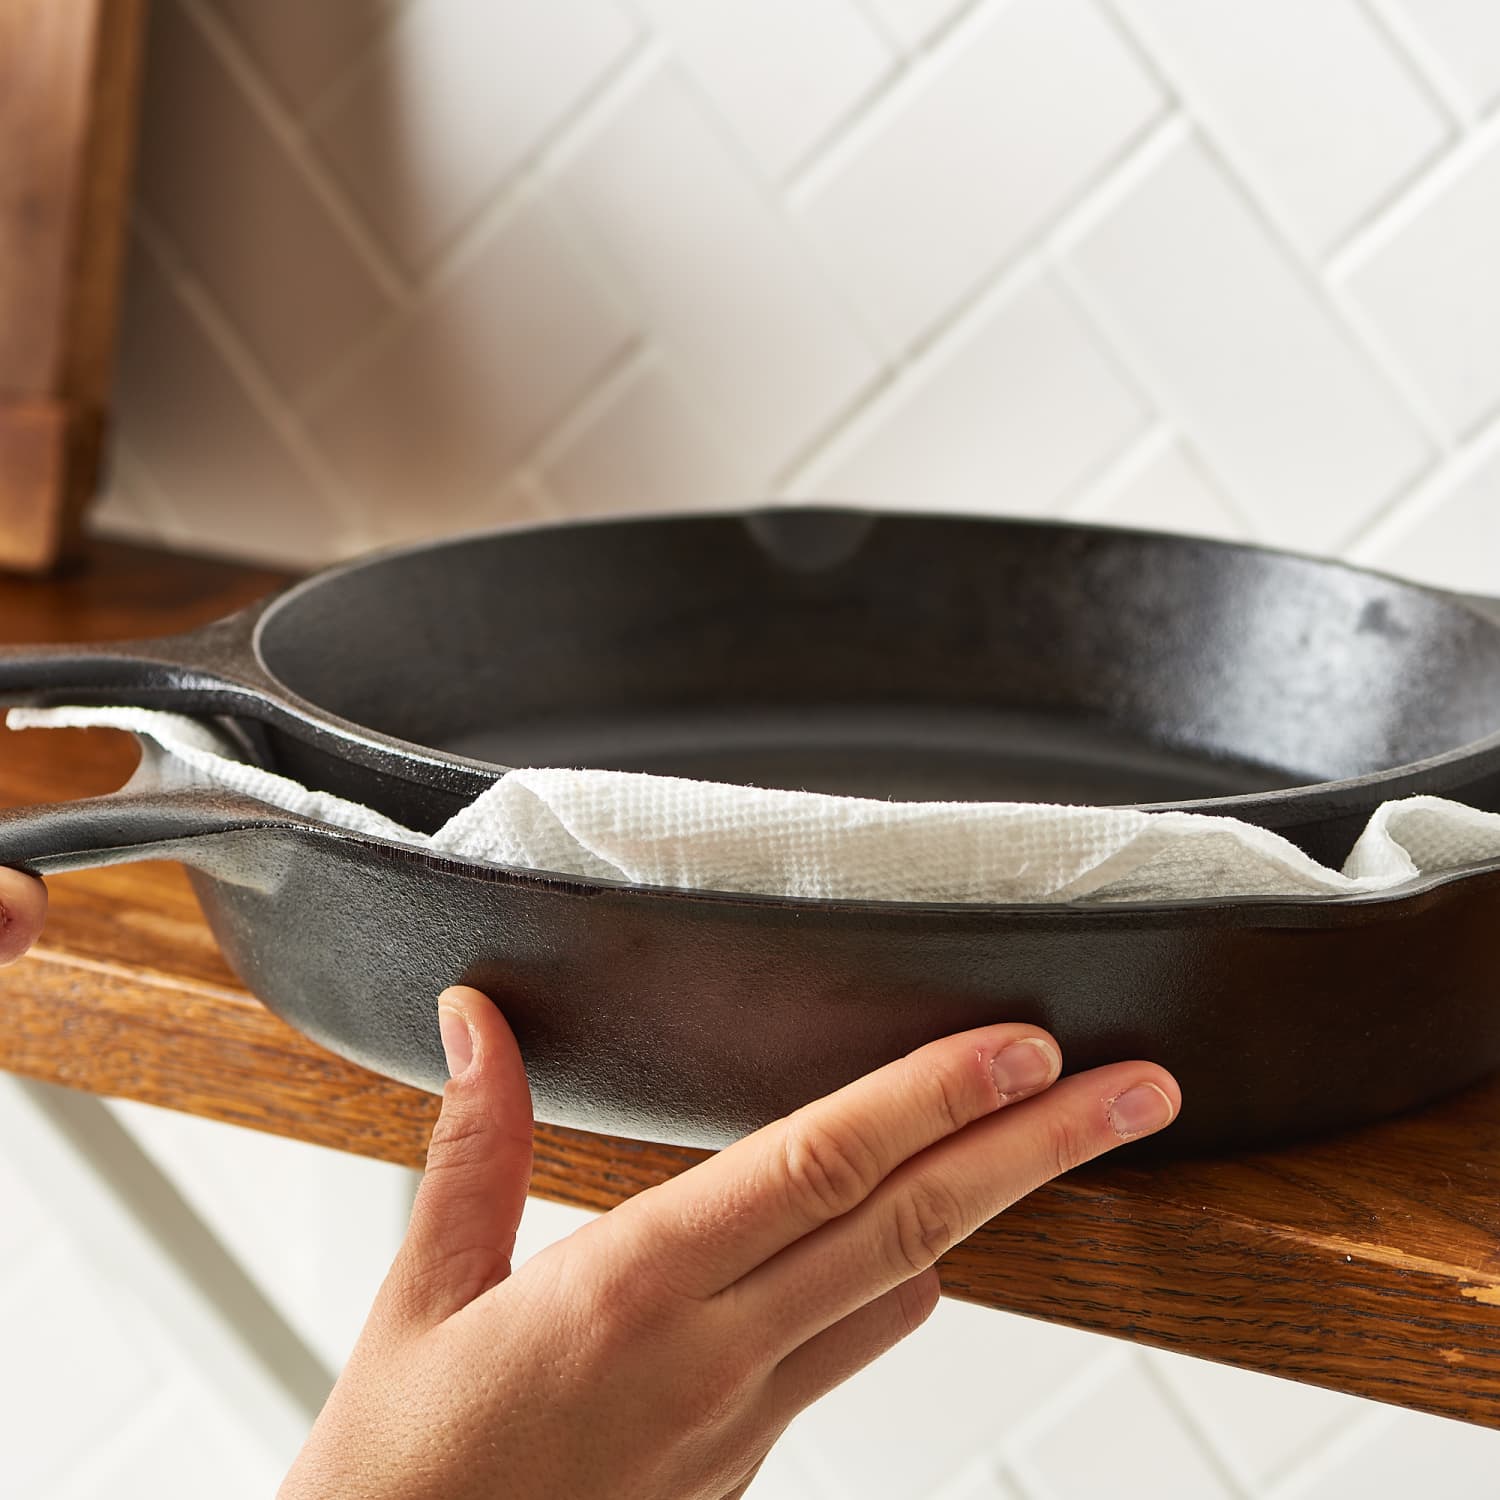 Space-saving Solution, How to Store Cast-Iron Pans